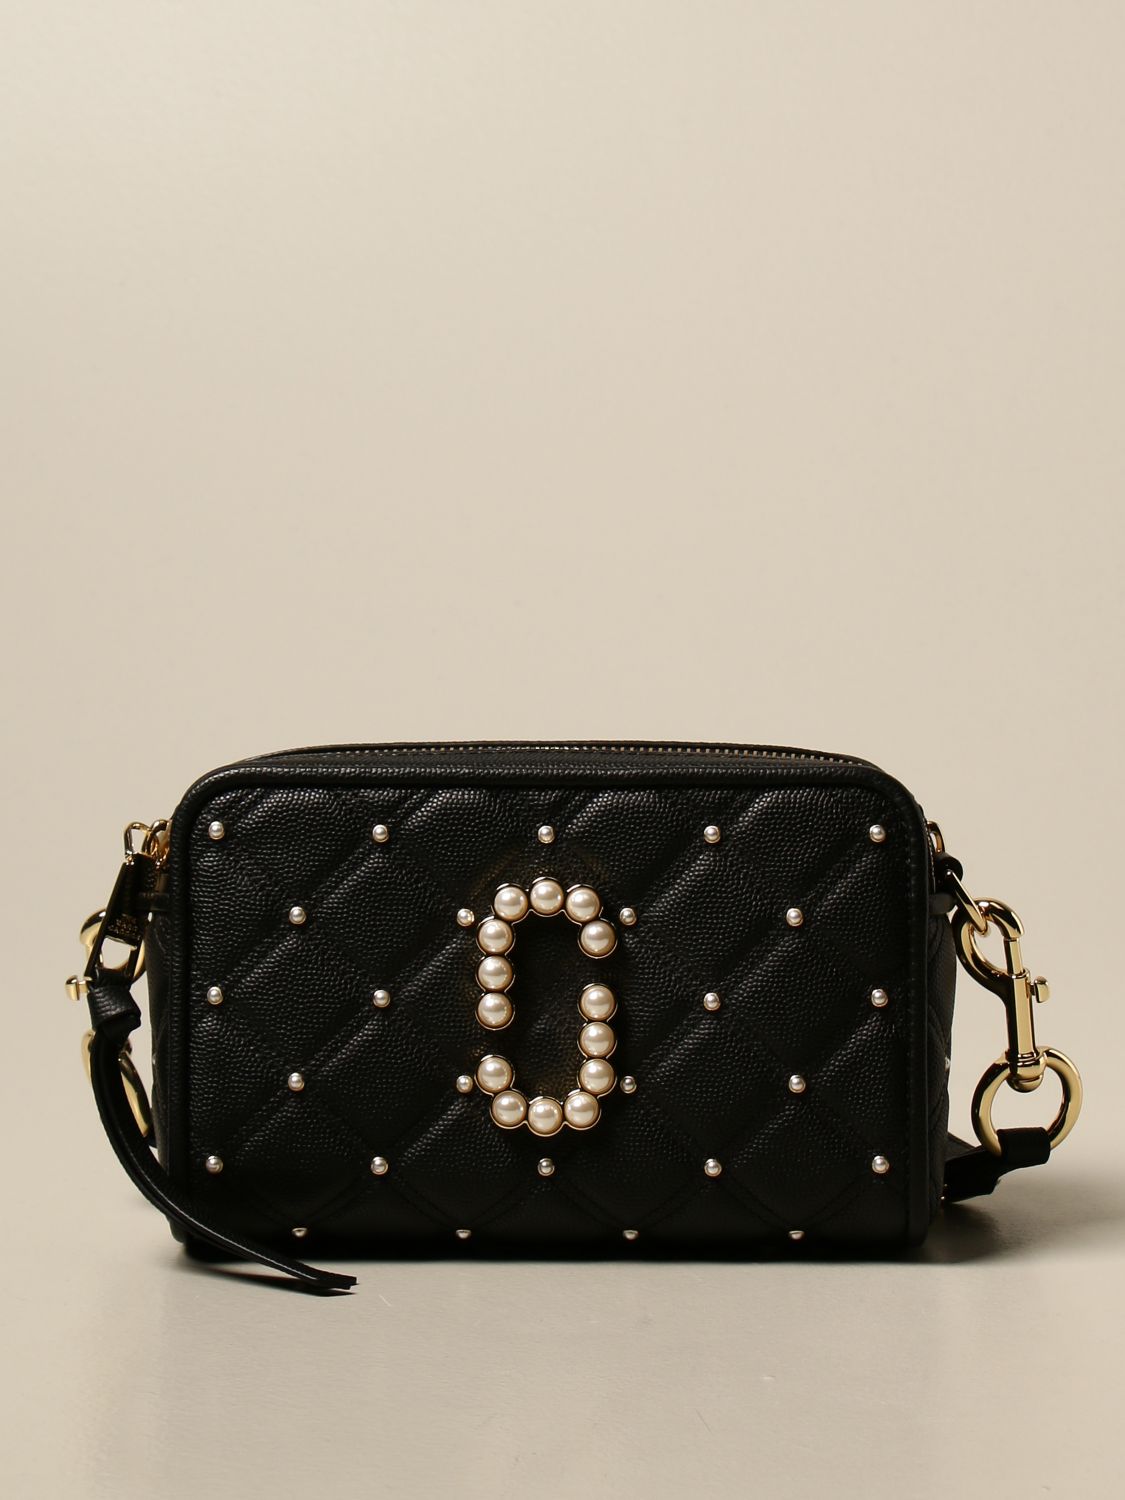 The Softshot Marc Jacobs bag in quilted leather